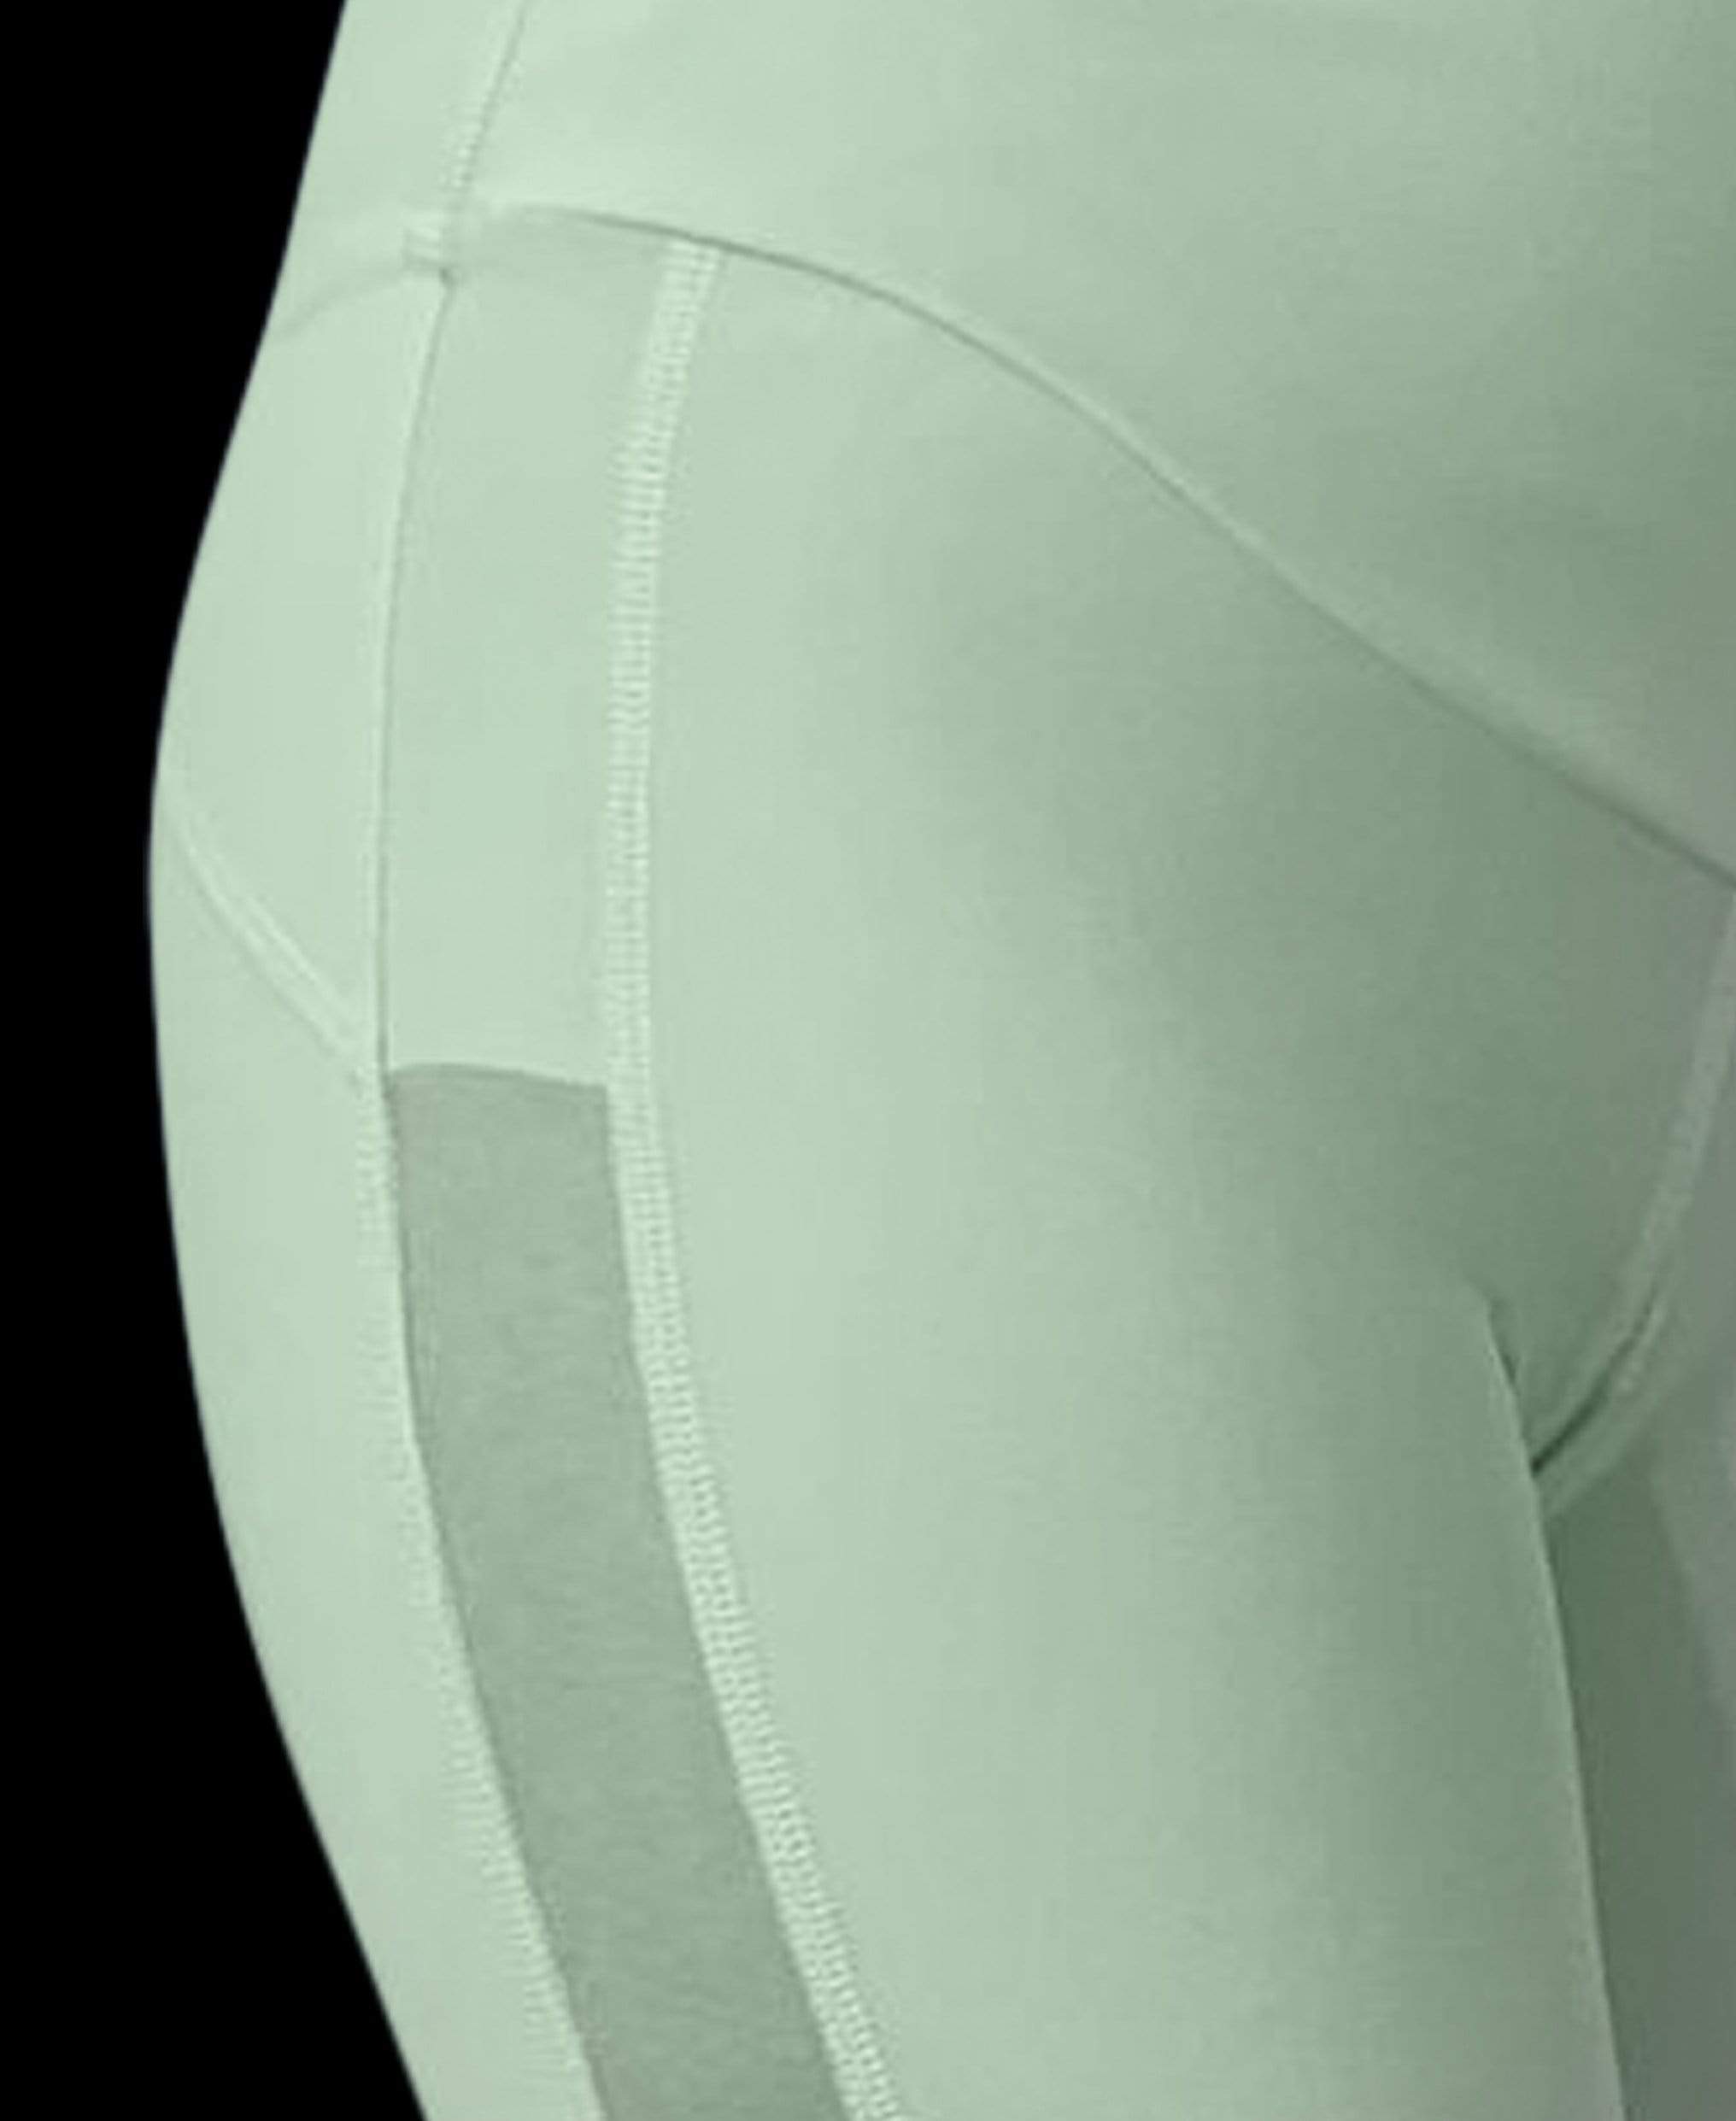 Reflexone B-Confident Recycled Material Cycling Short | Misty Jade